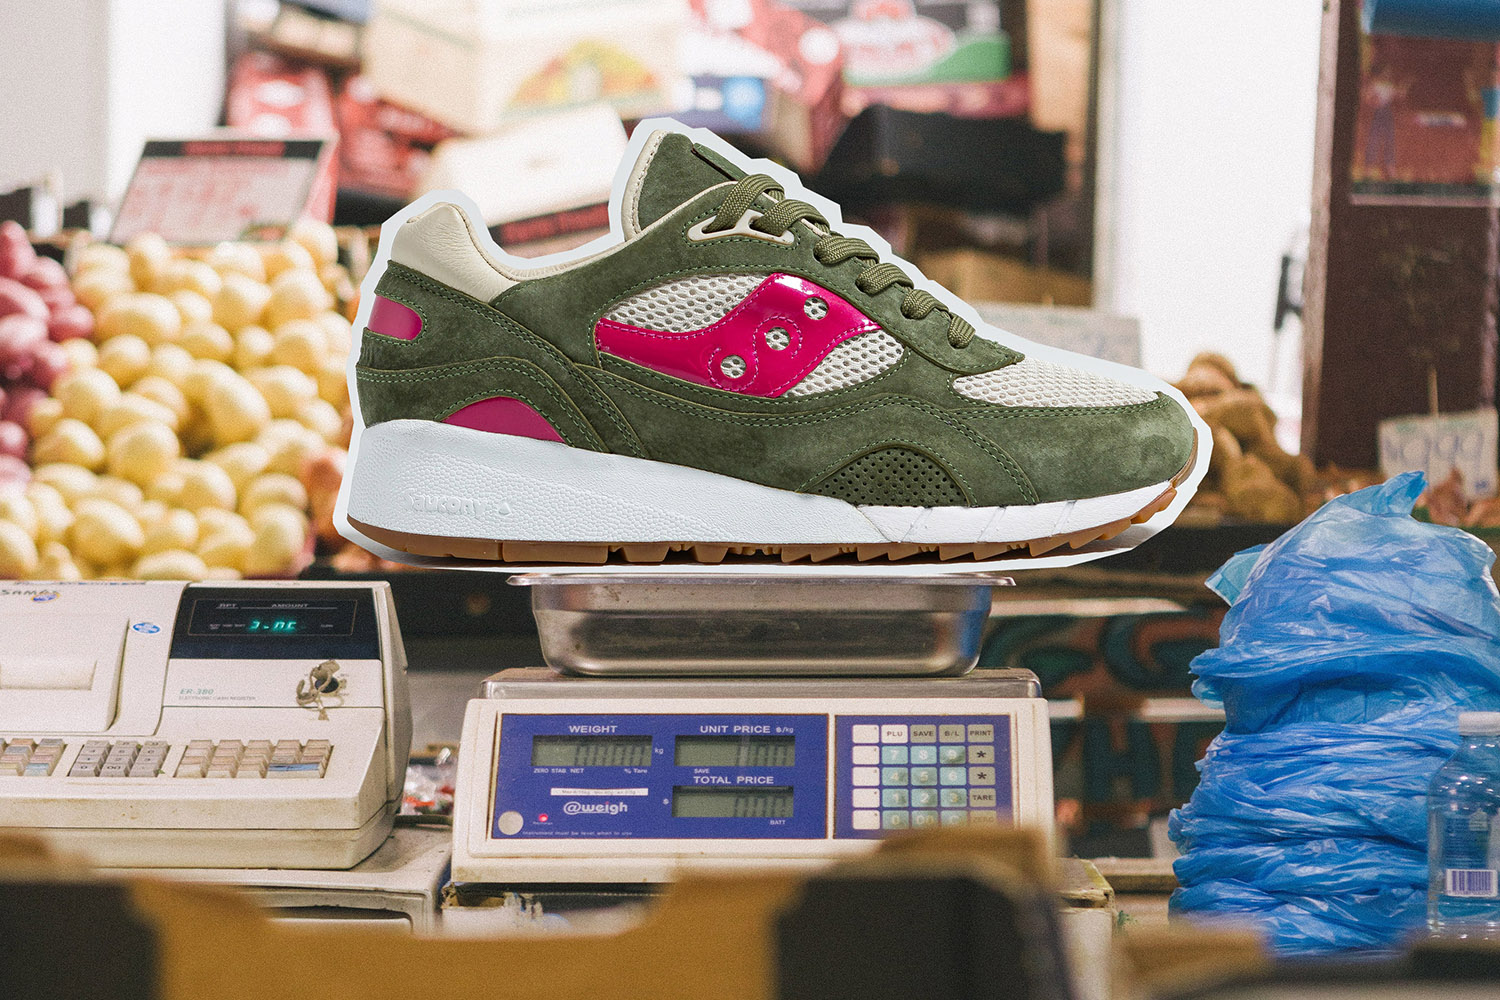 Up There X Saucony Shadow 6000 Doors To The World